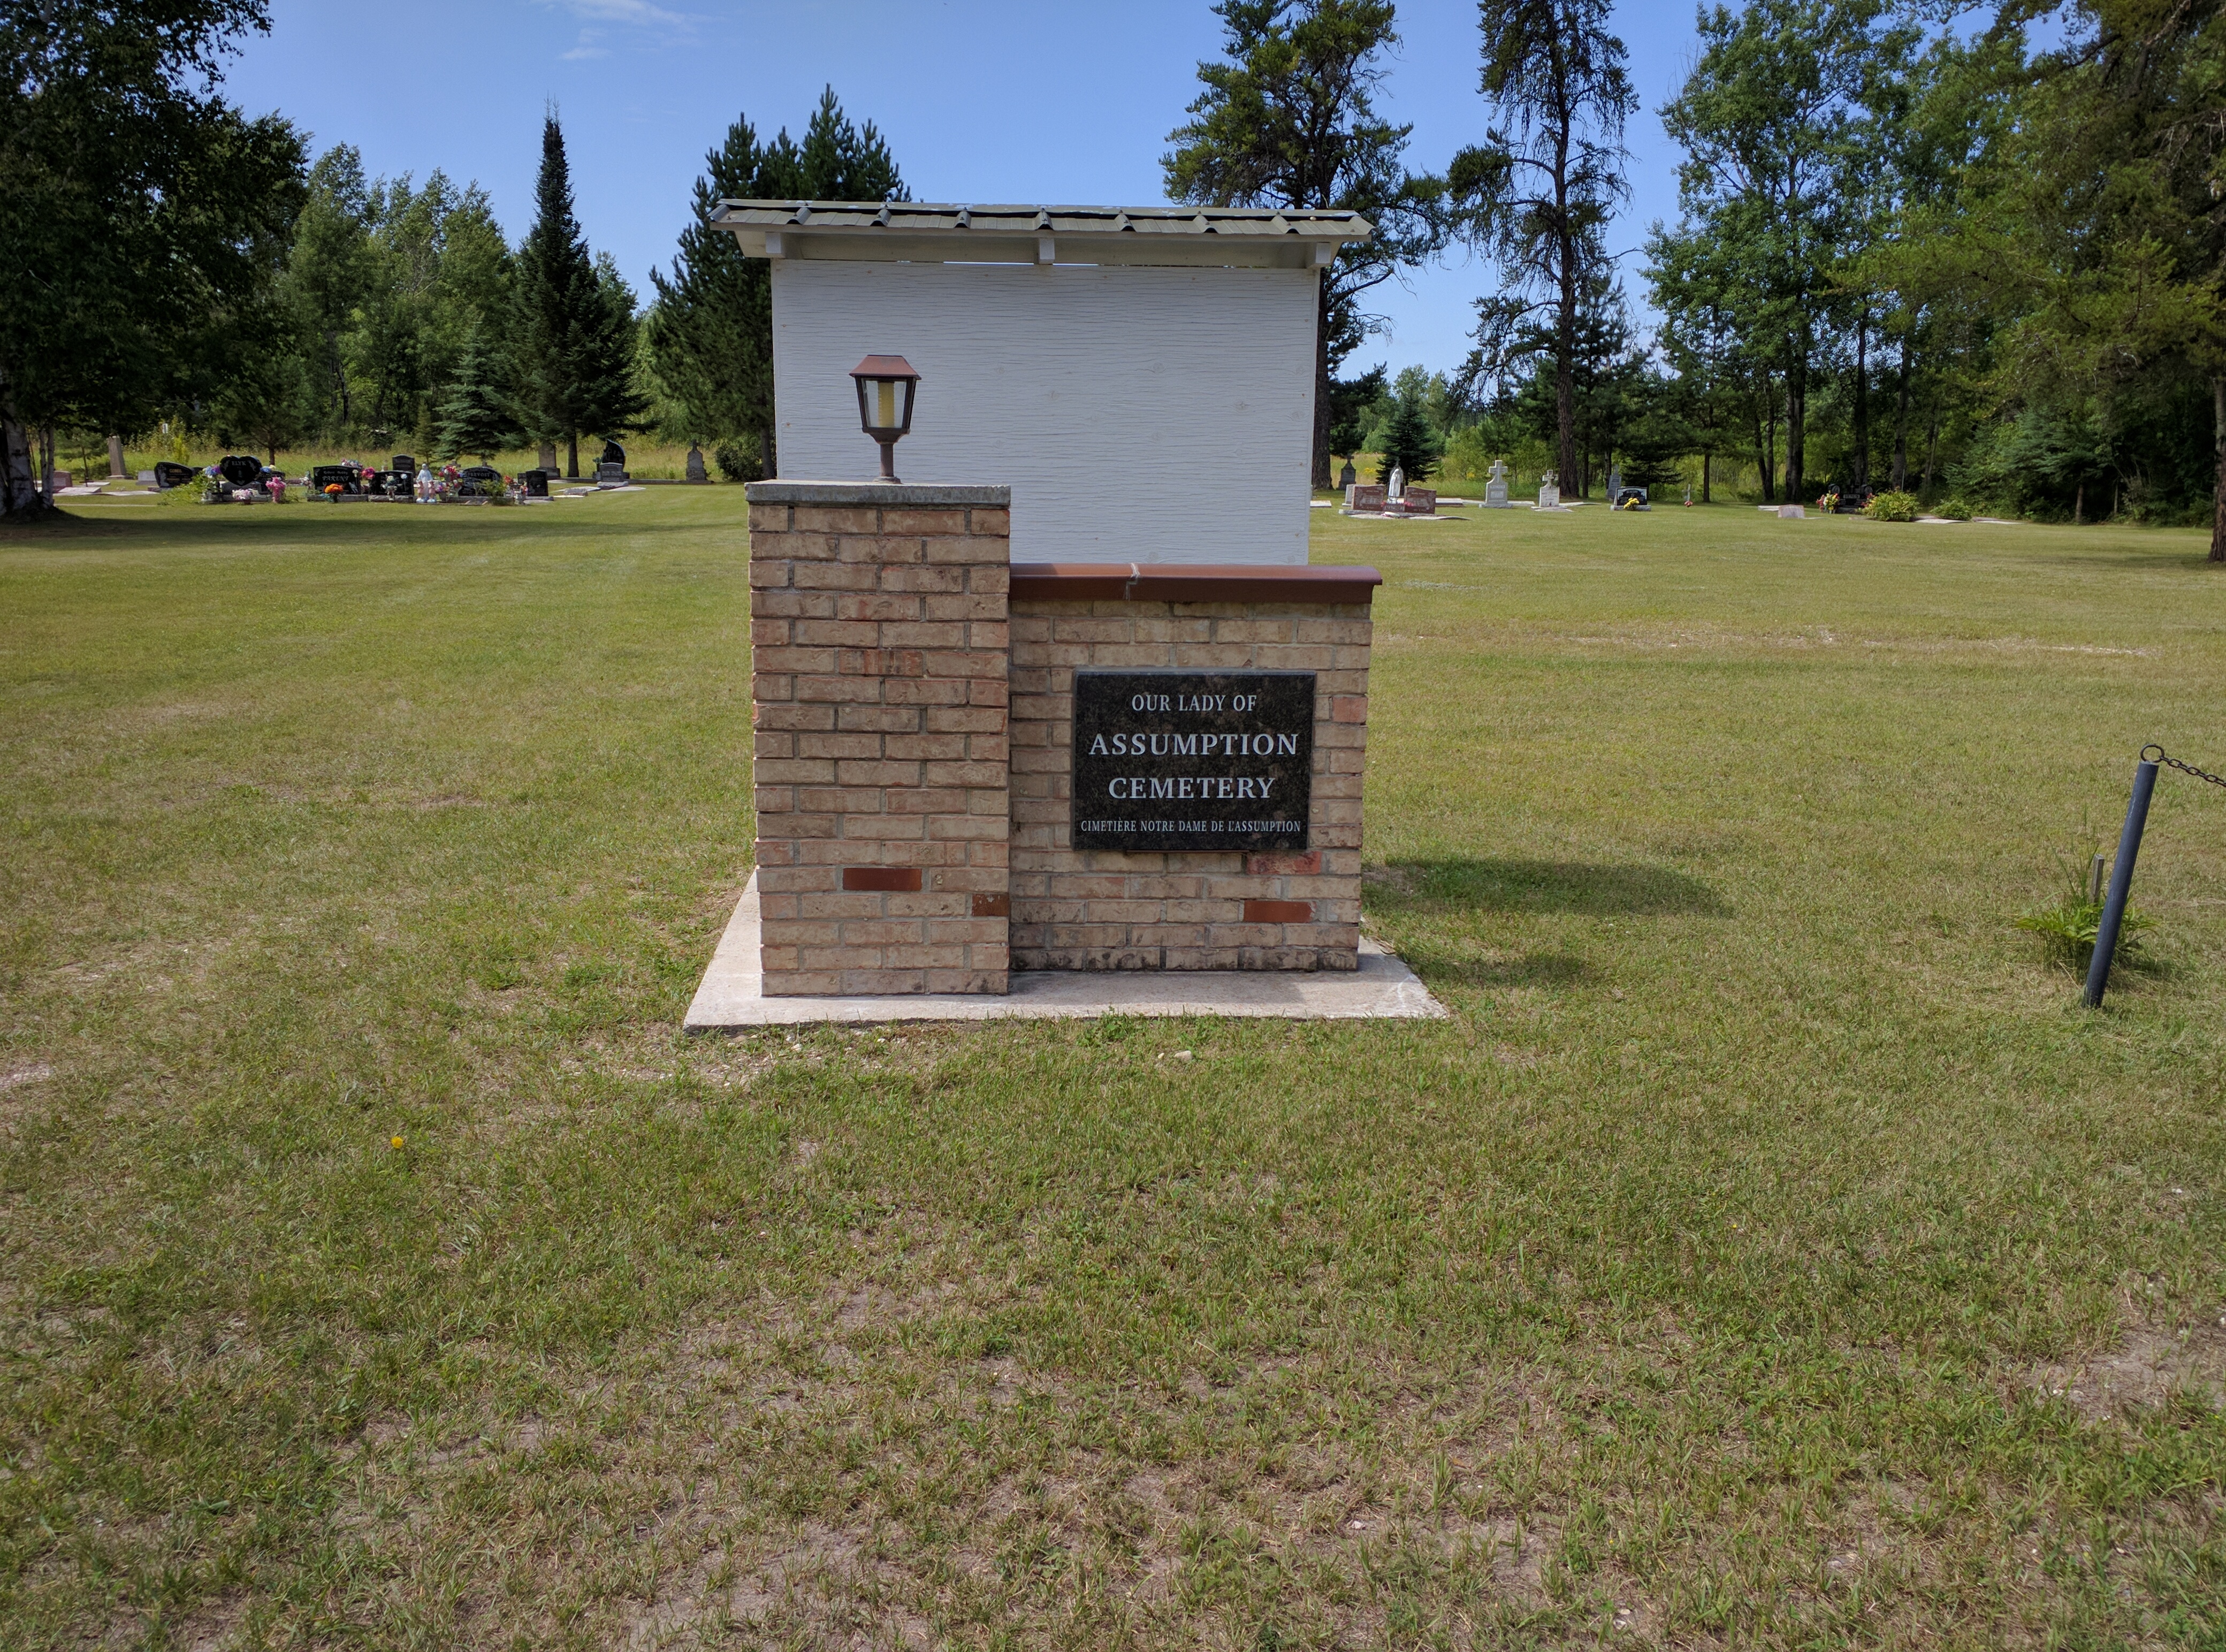 Our Lady of Assumption Cemetery